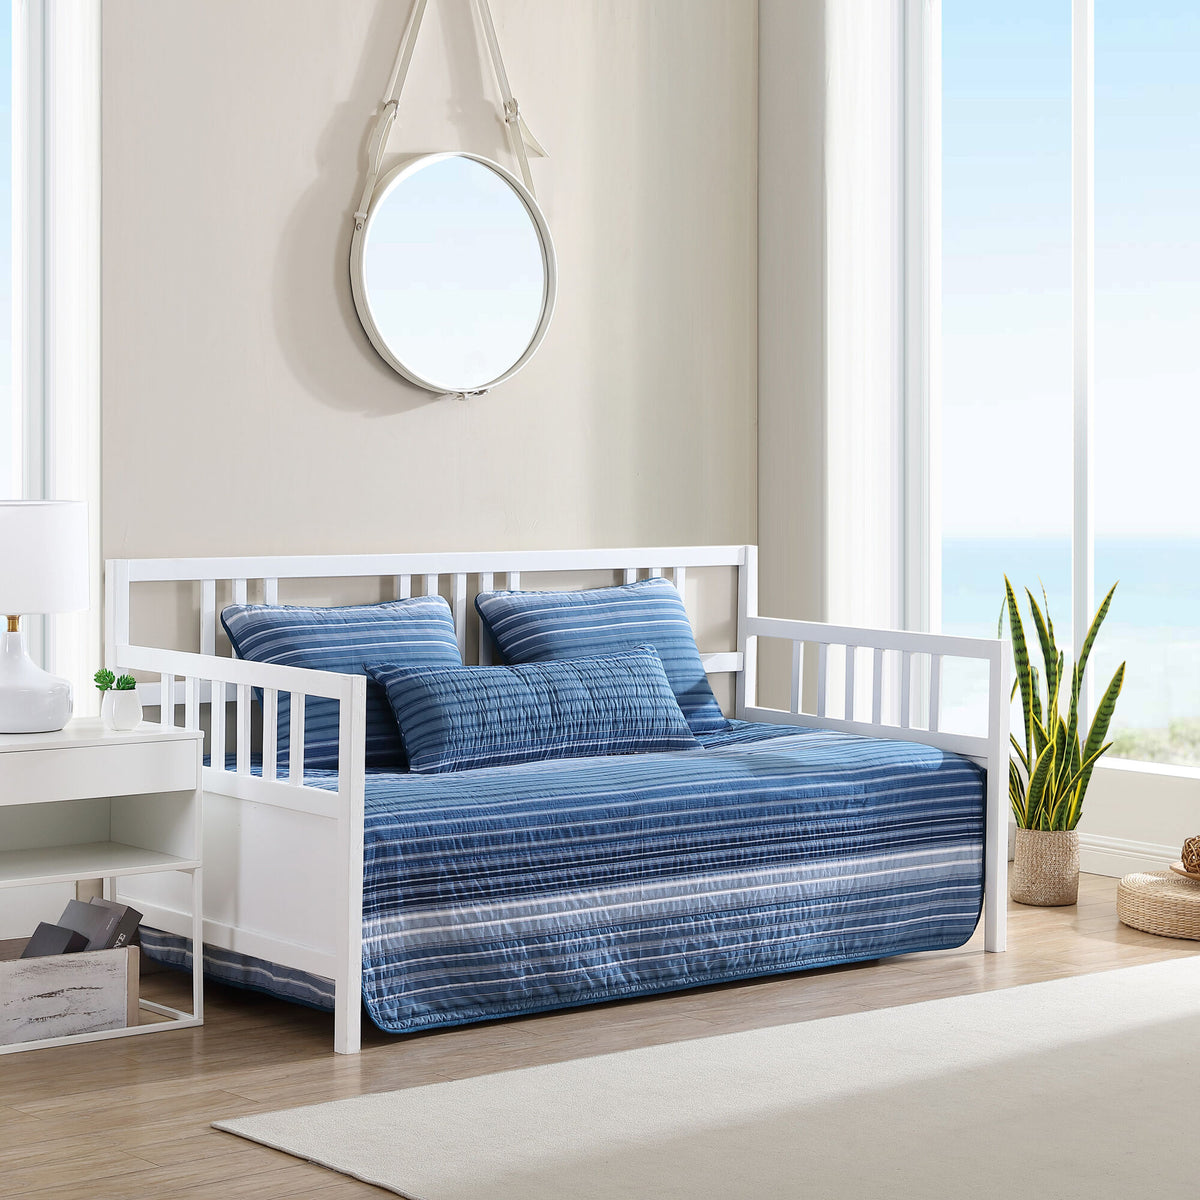 Nautica Coveside Daybed Quilt And Sham Set Blue Mirage